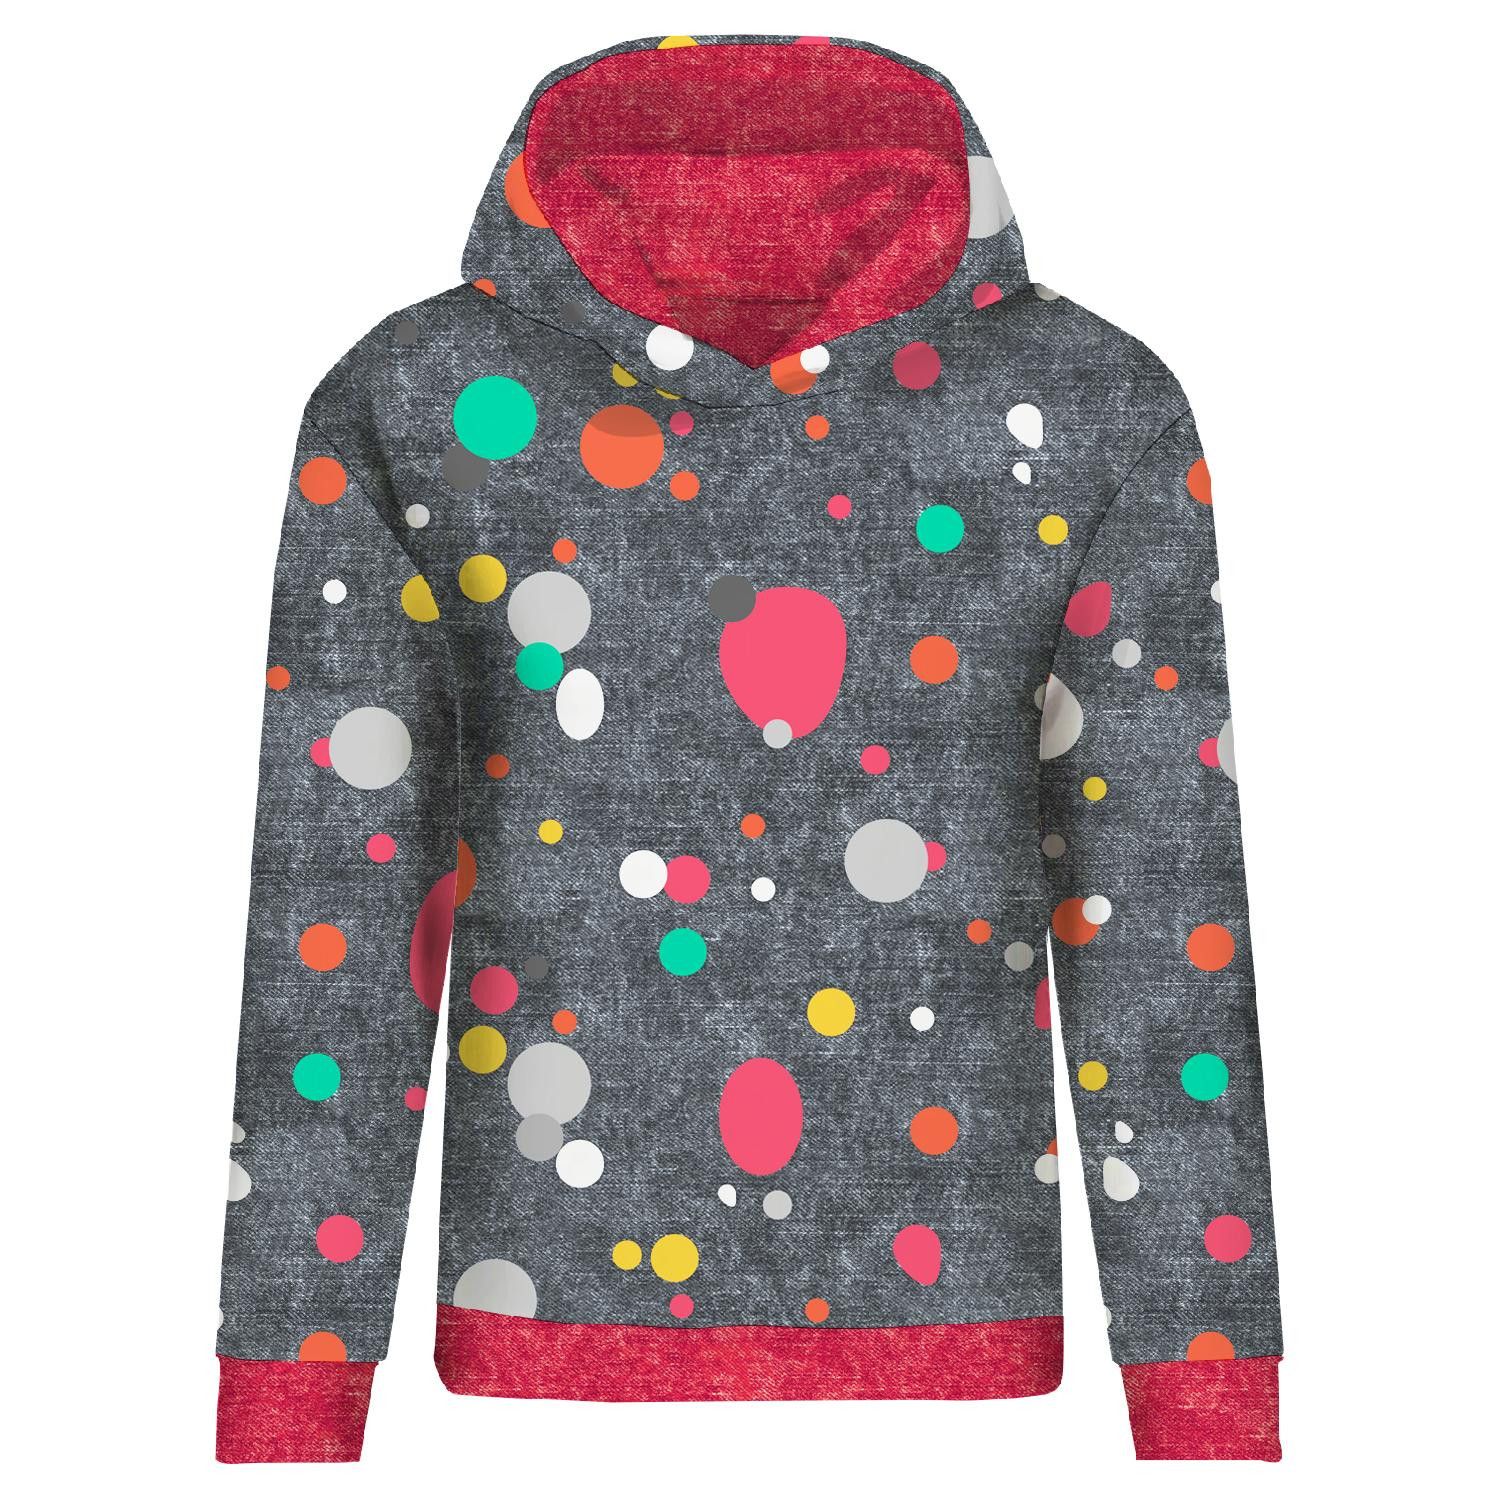 COLORFUL DOTSIES / ACID WASH GRAPHITE - brushed knit fabric with teddy / alpine fleece